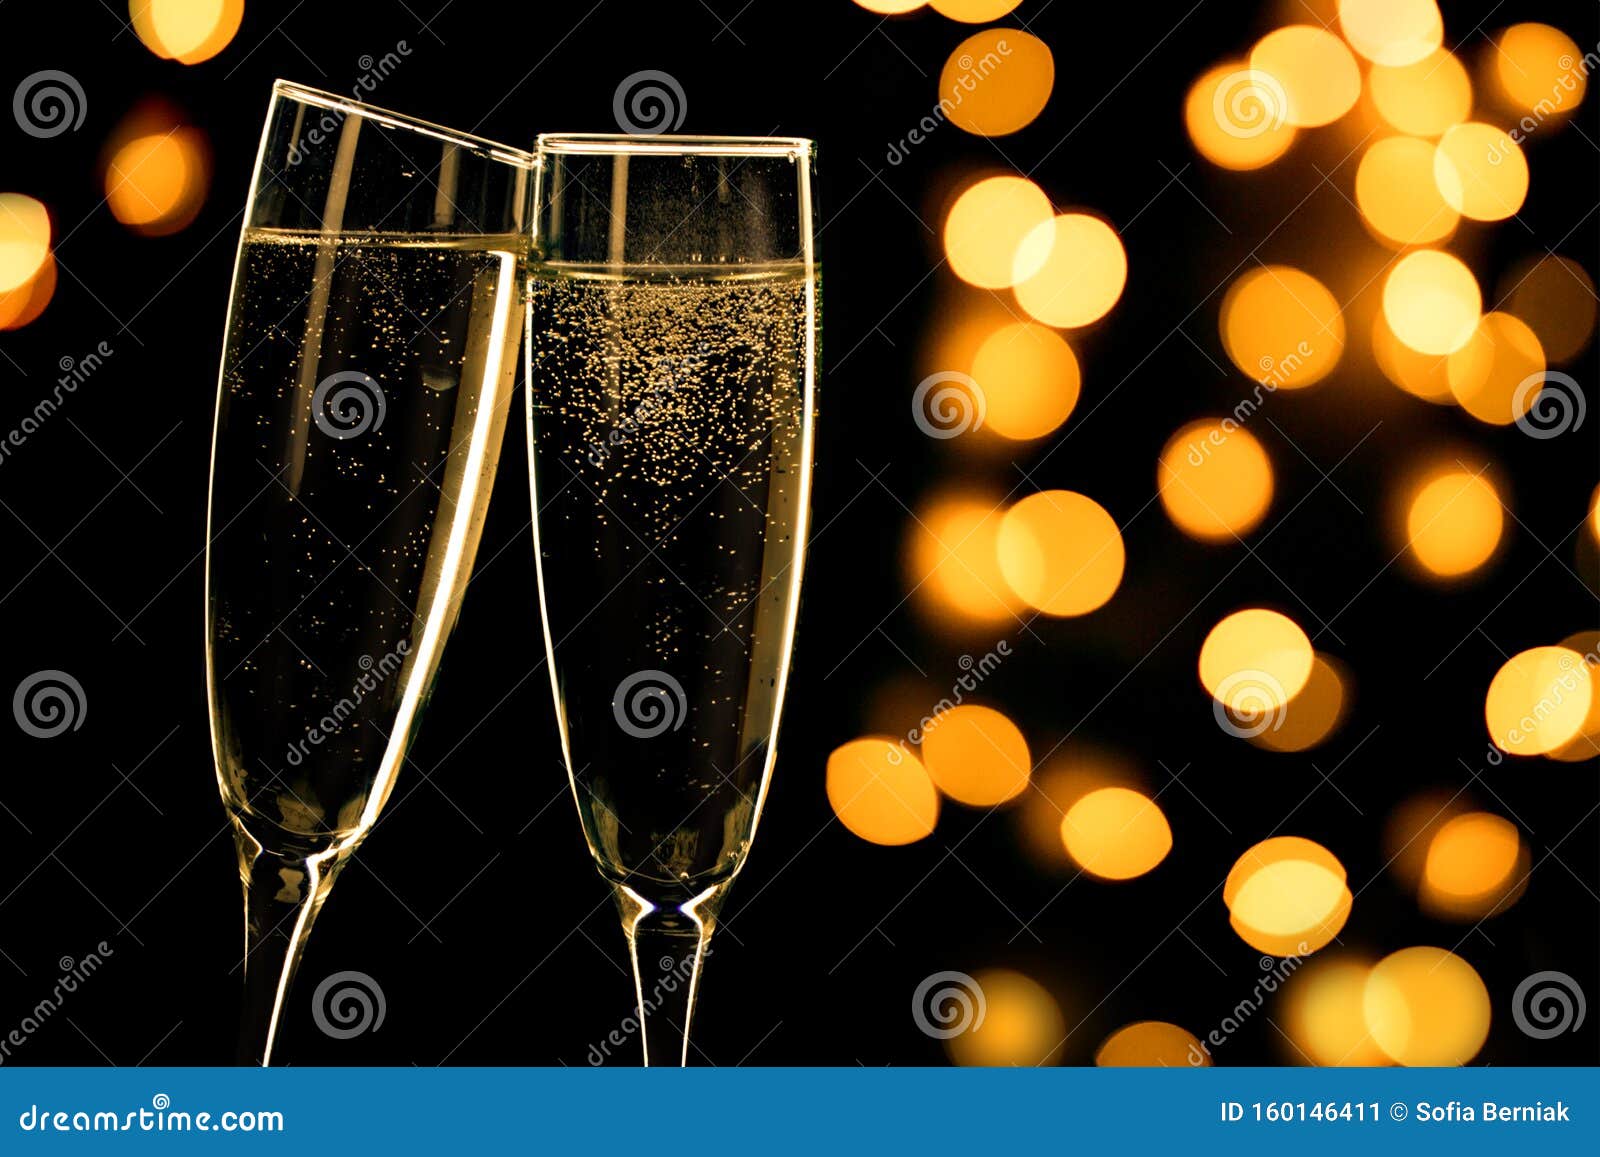 Two Champagne Glasses Toasting Painting by Ikon Images - Fine Art